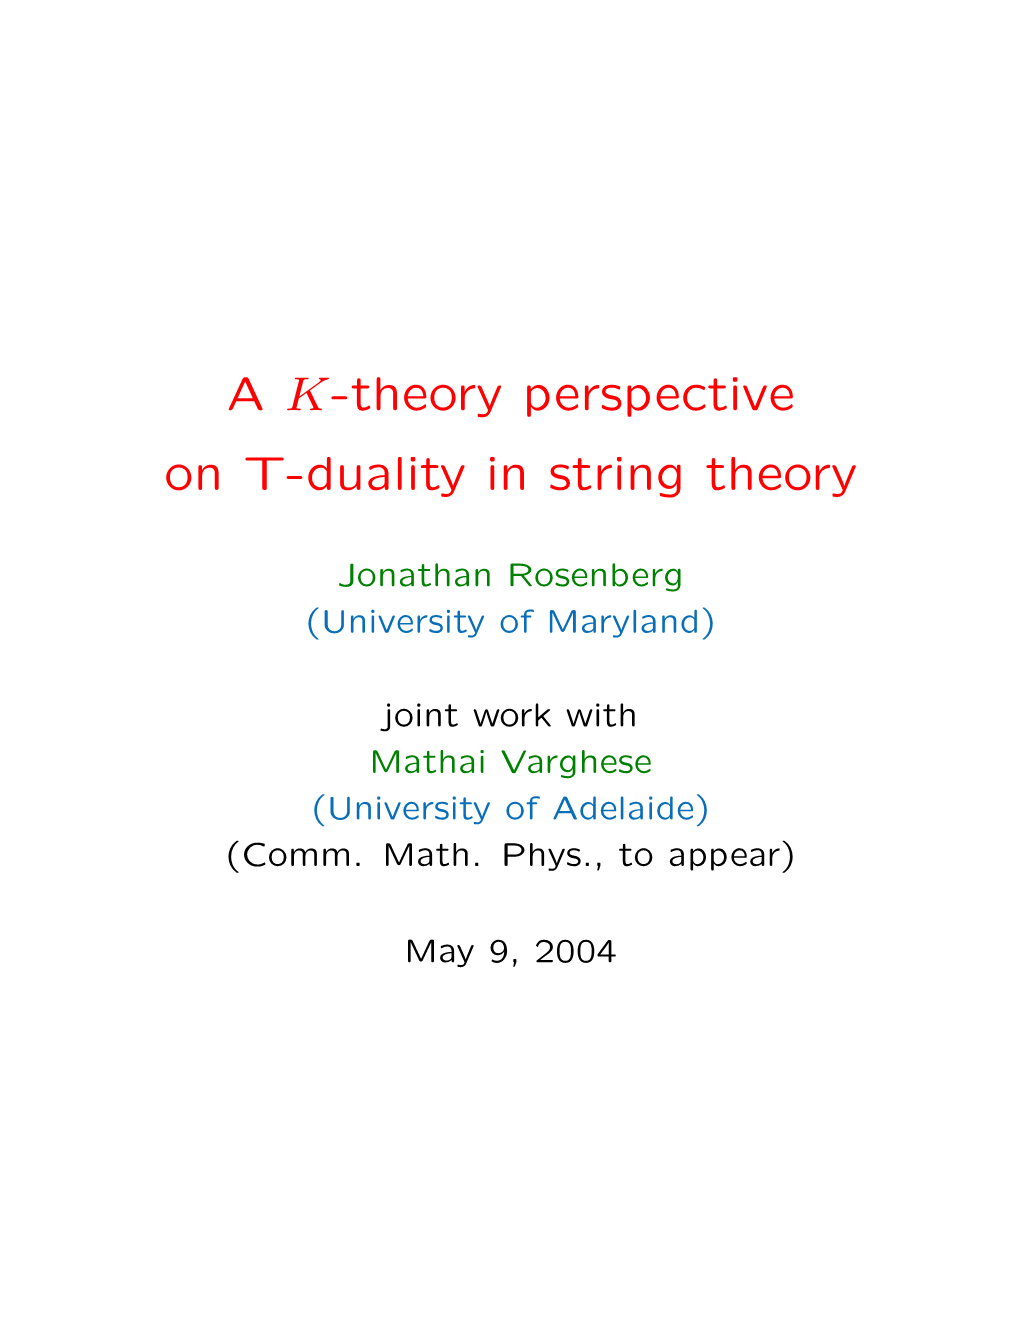 A K-Theory Perspective on T-Duality in String Theory